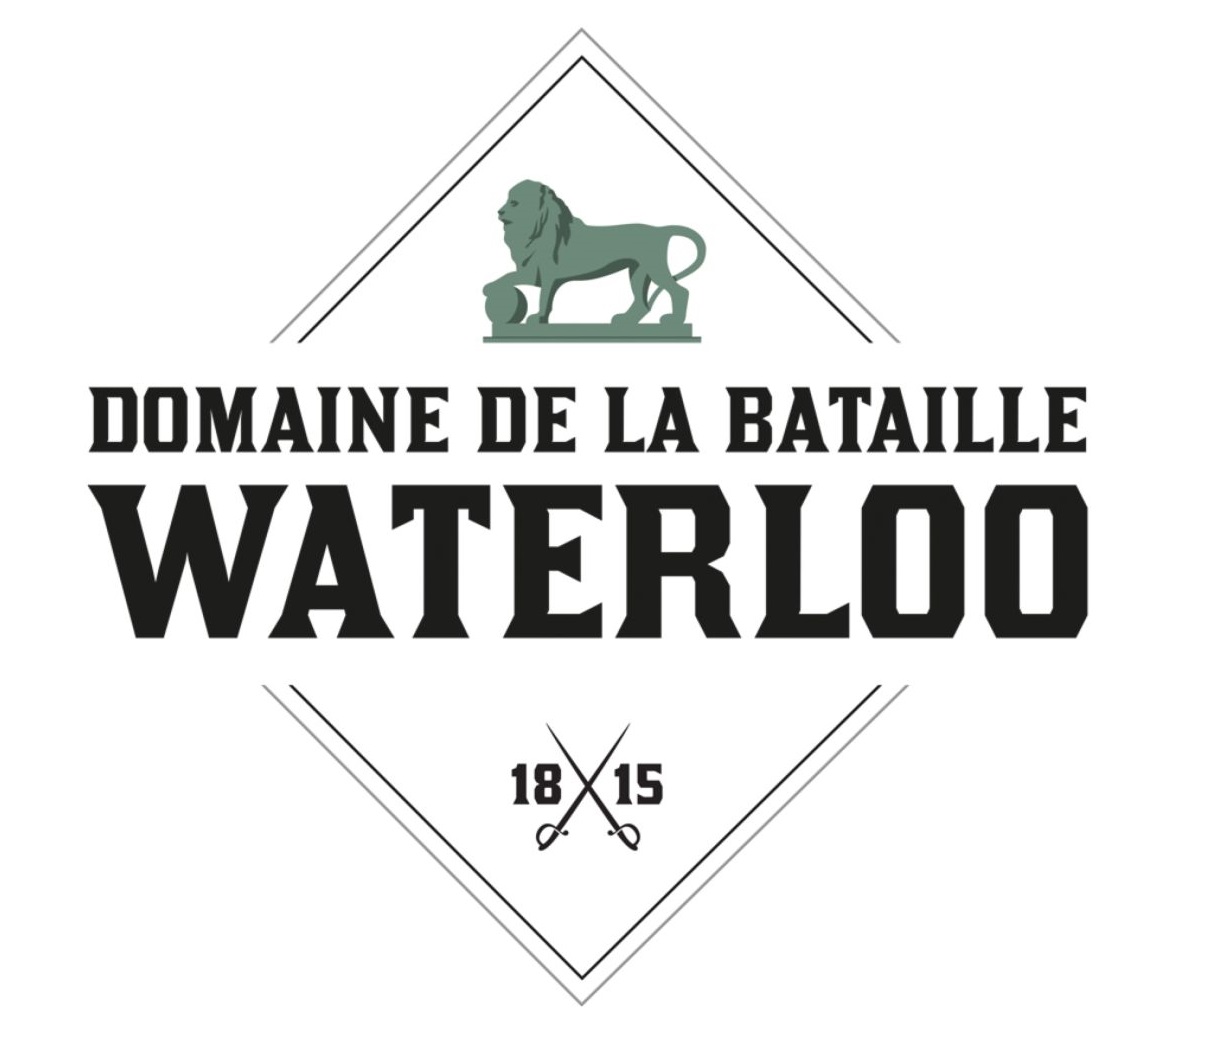 Domain of the Battle of Waterloo 1815